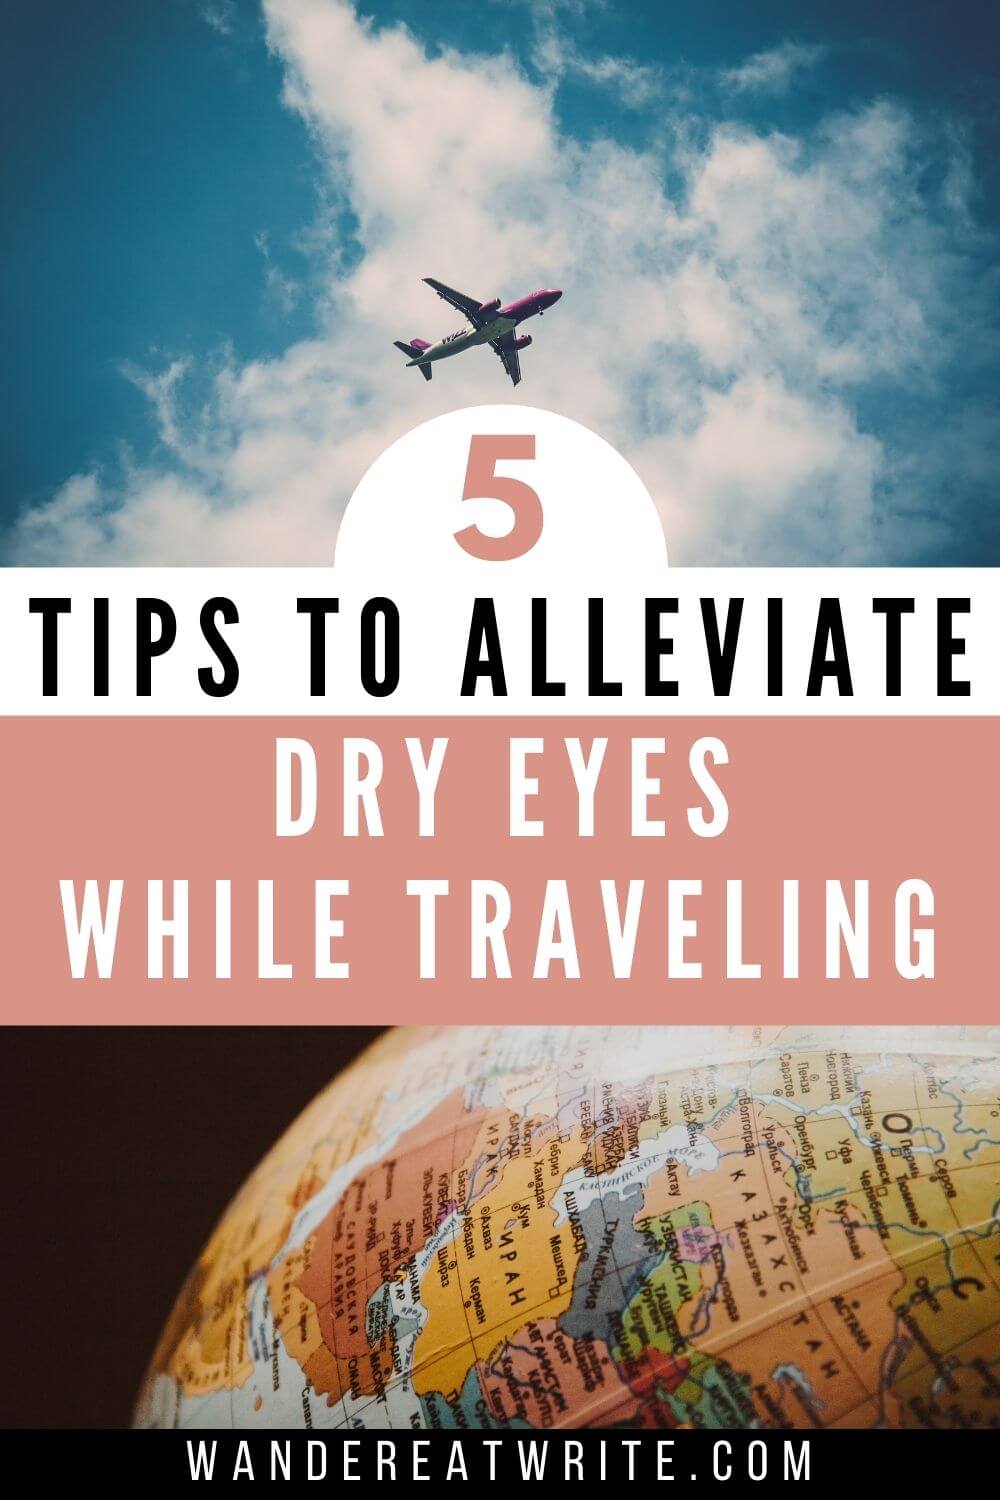 5 tips to alleviate dry eyes while traveling